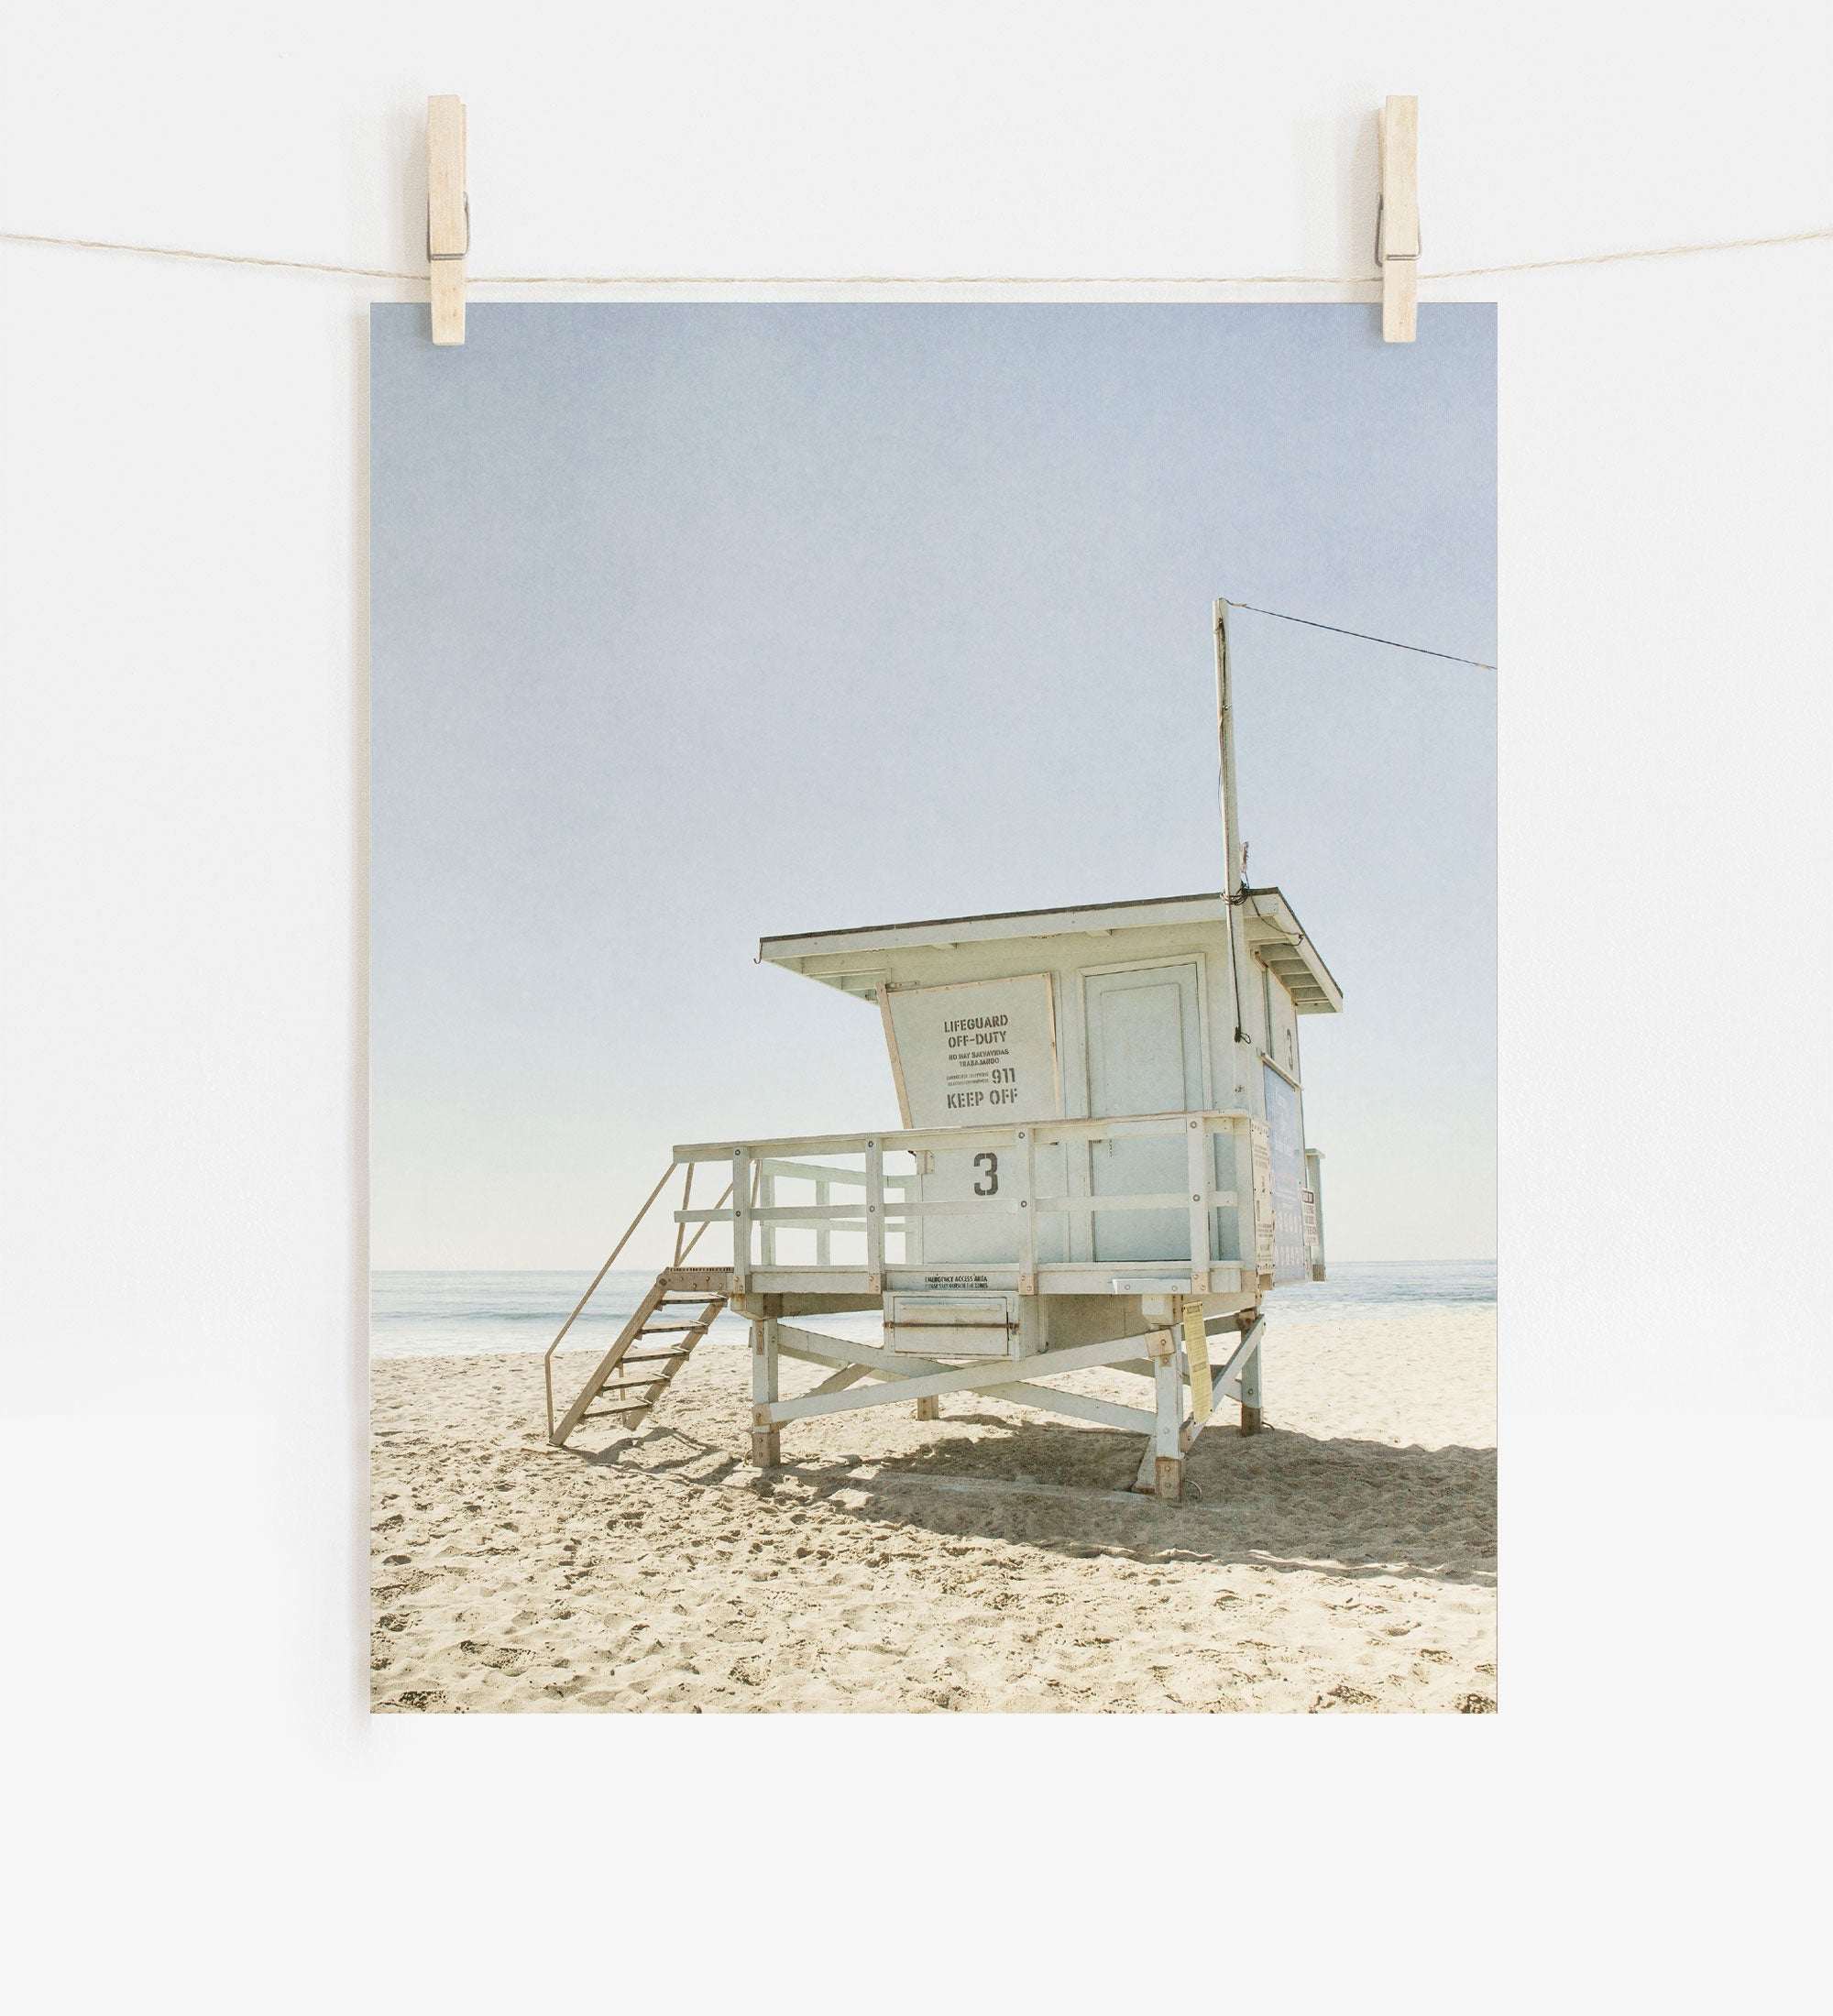 A photo of a California Malibu Beach print, 'Surfrider Lifeguard' printed on archival photographic paper, hanging against a sky-blue background, set on a sandy beach under bright sunlight. (Offley Green)